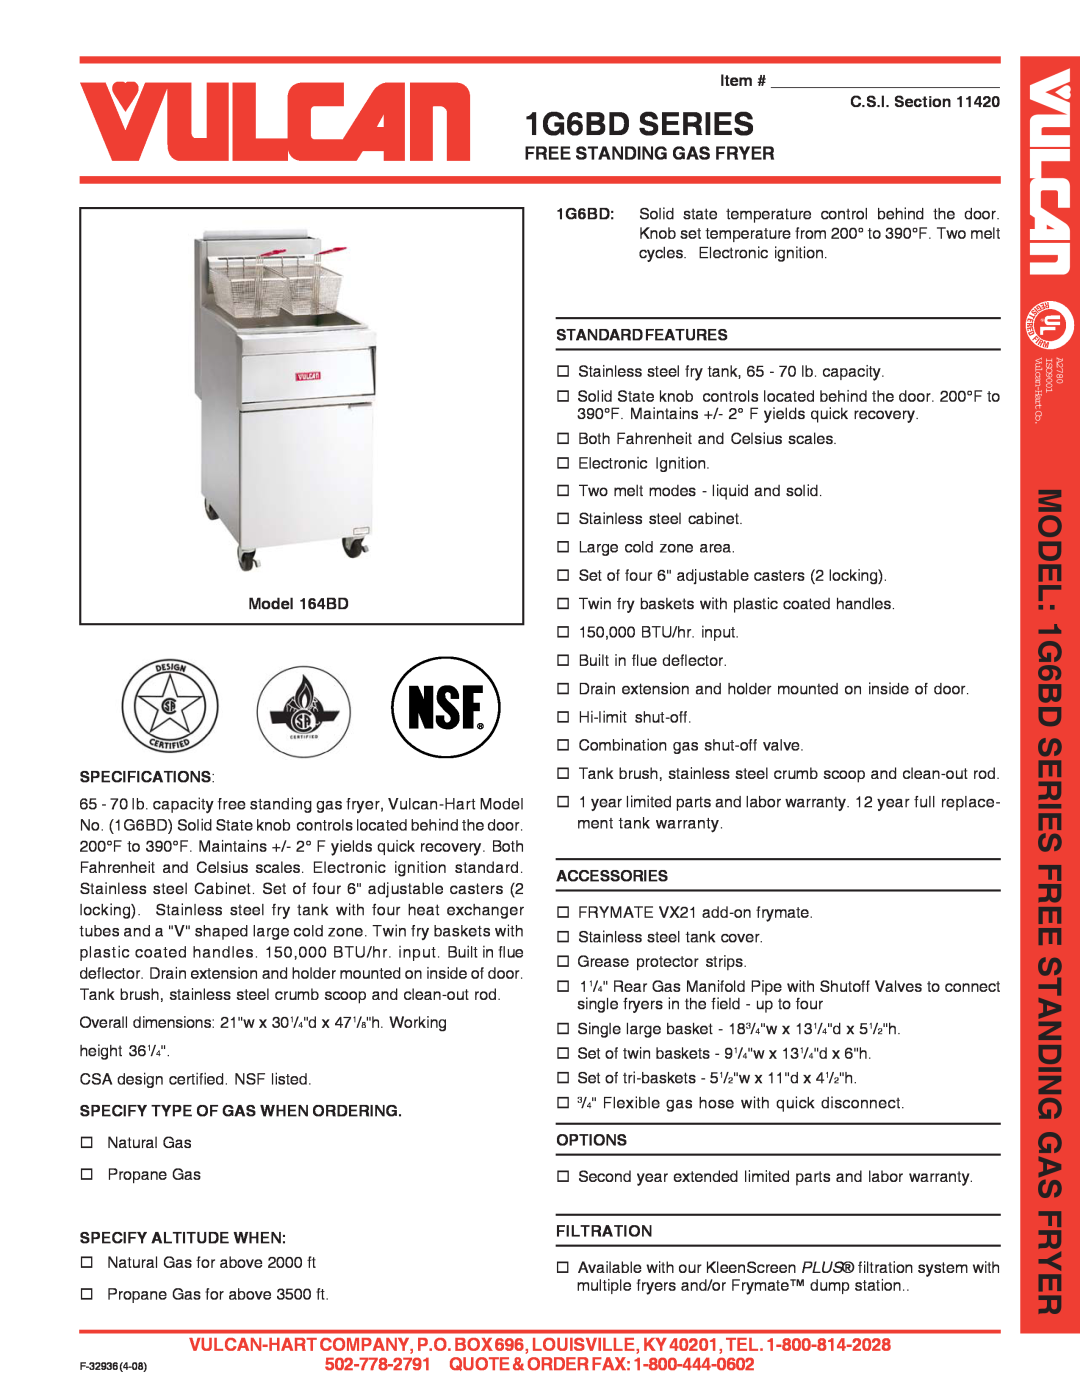 Vulcan-Hart 164BD specifications 1G6BD SERIES, Free Standing Gas Fryer, Quote&Orderfax, Item # __________________________ 